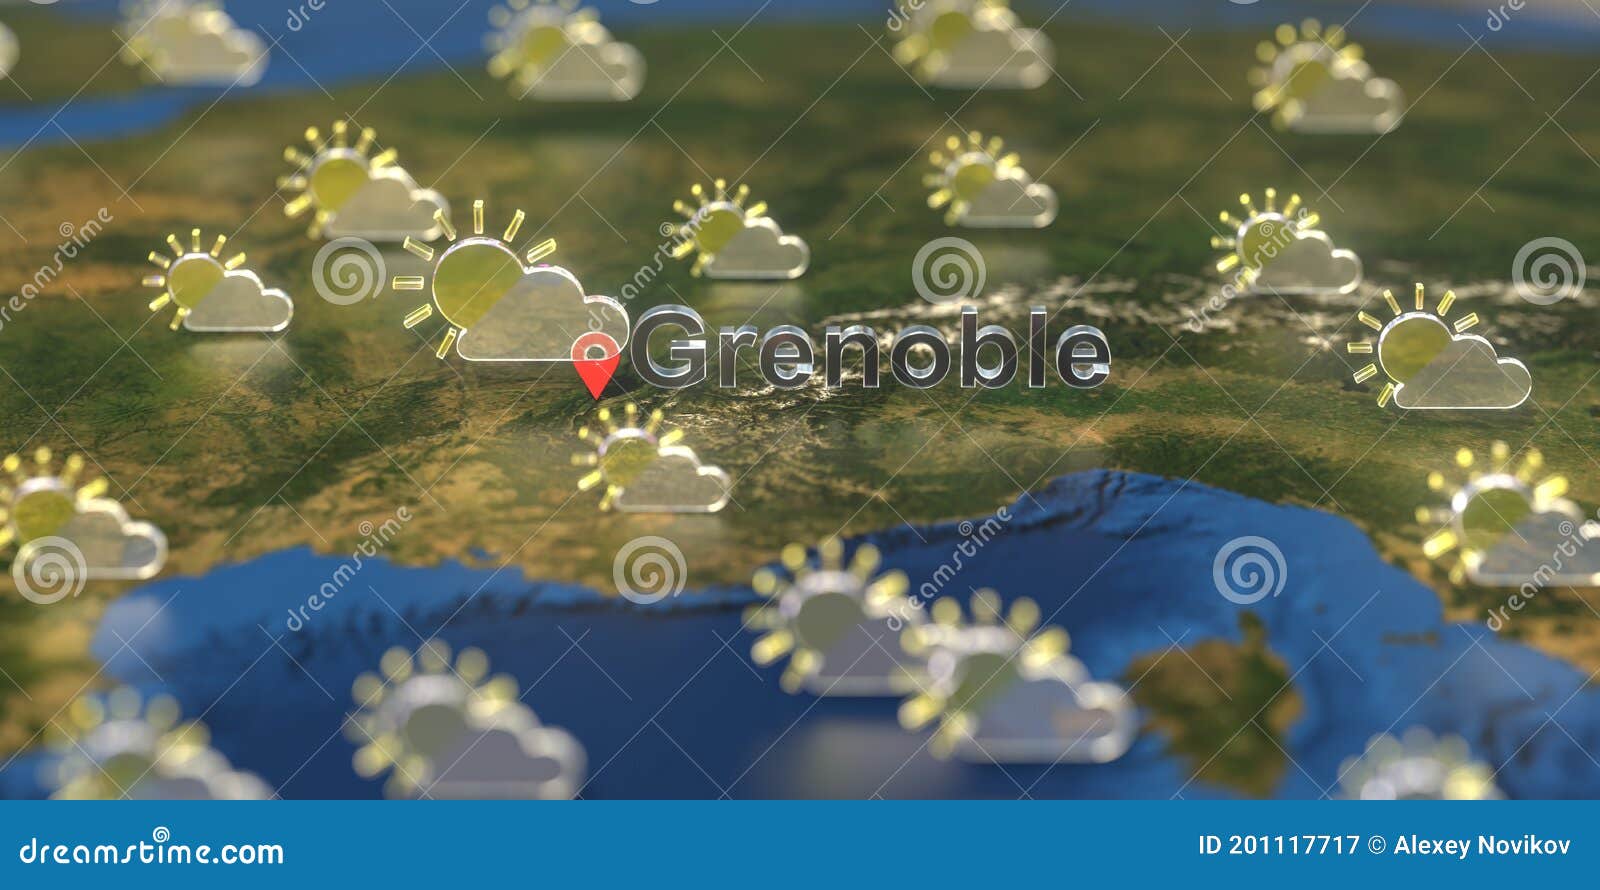 Grenoble City And Partly Cloudy Weather Icon On The Map Weather Forecast Related 3d Rendering Stock Illustration Illustration Of Meteorology Icon